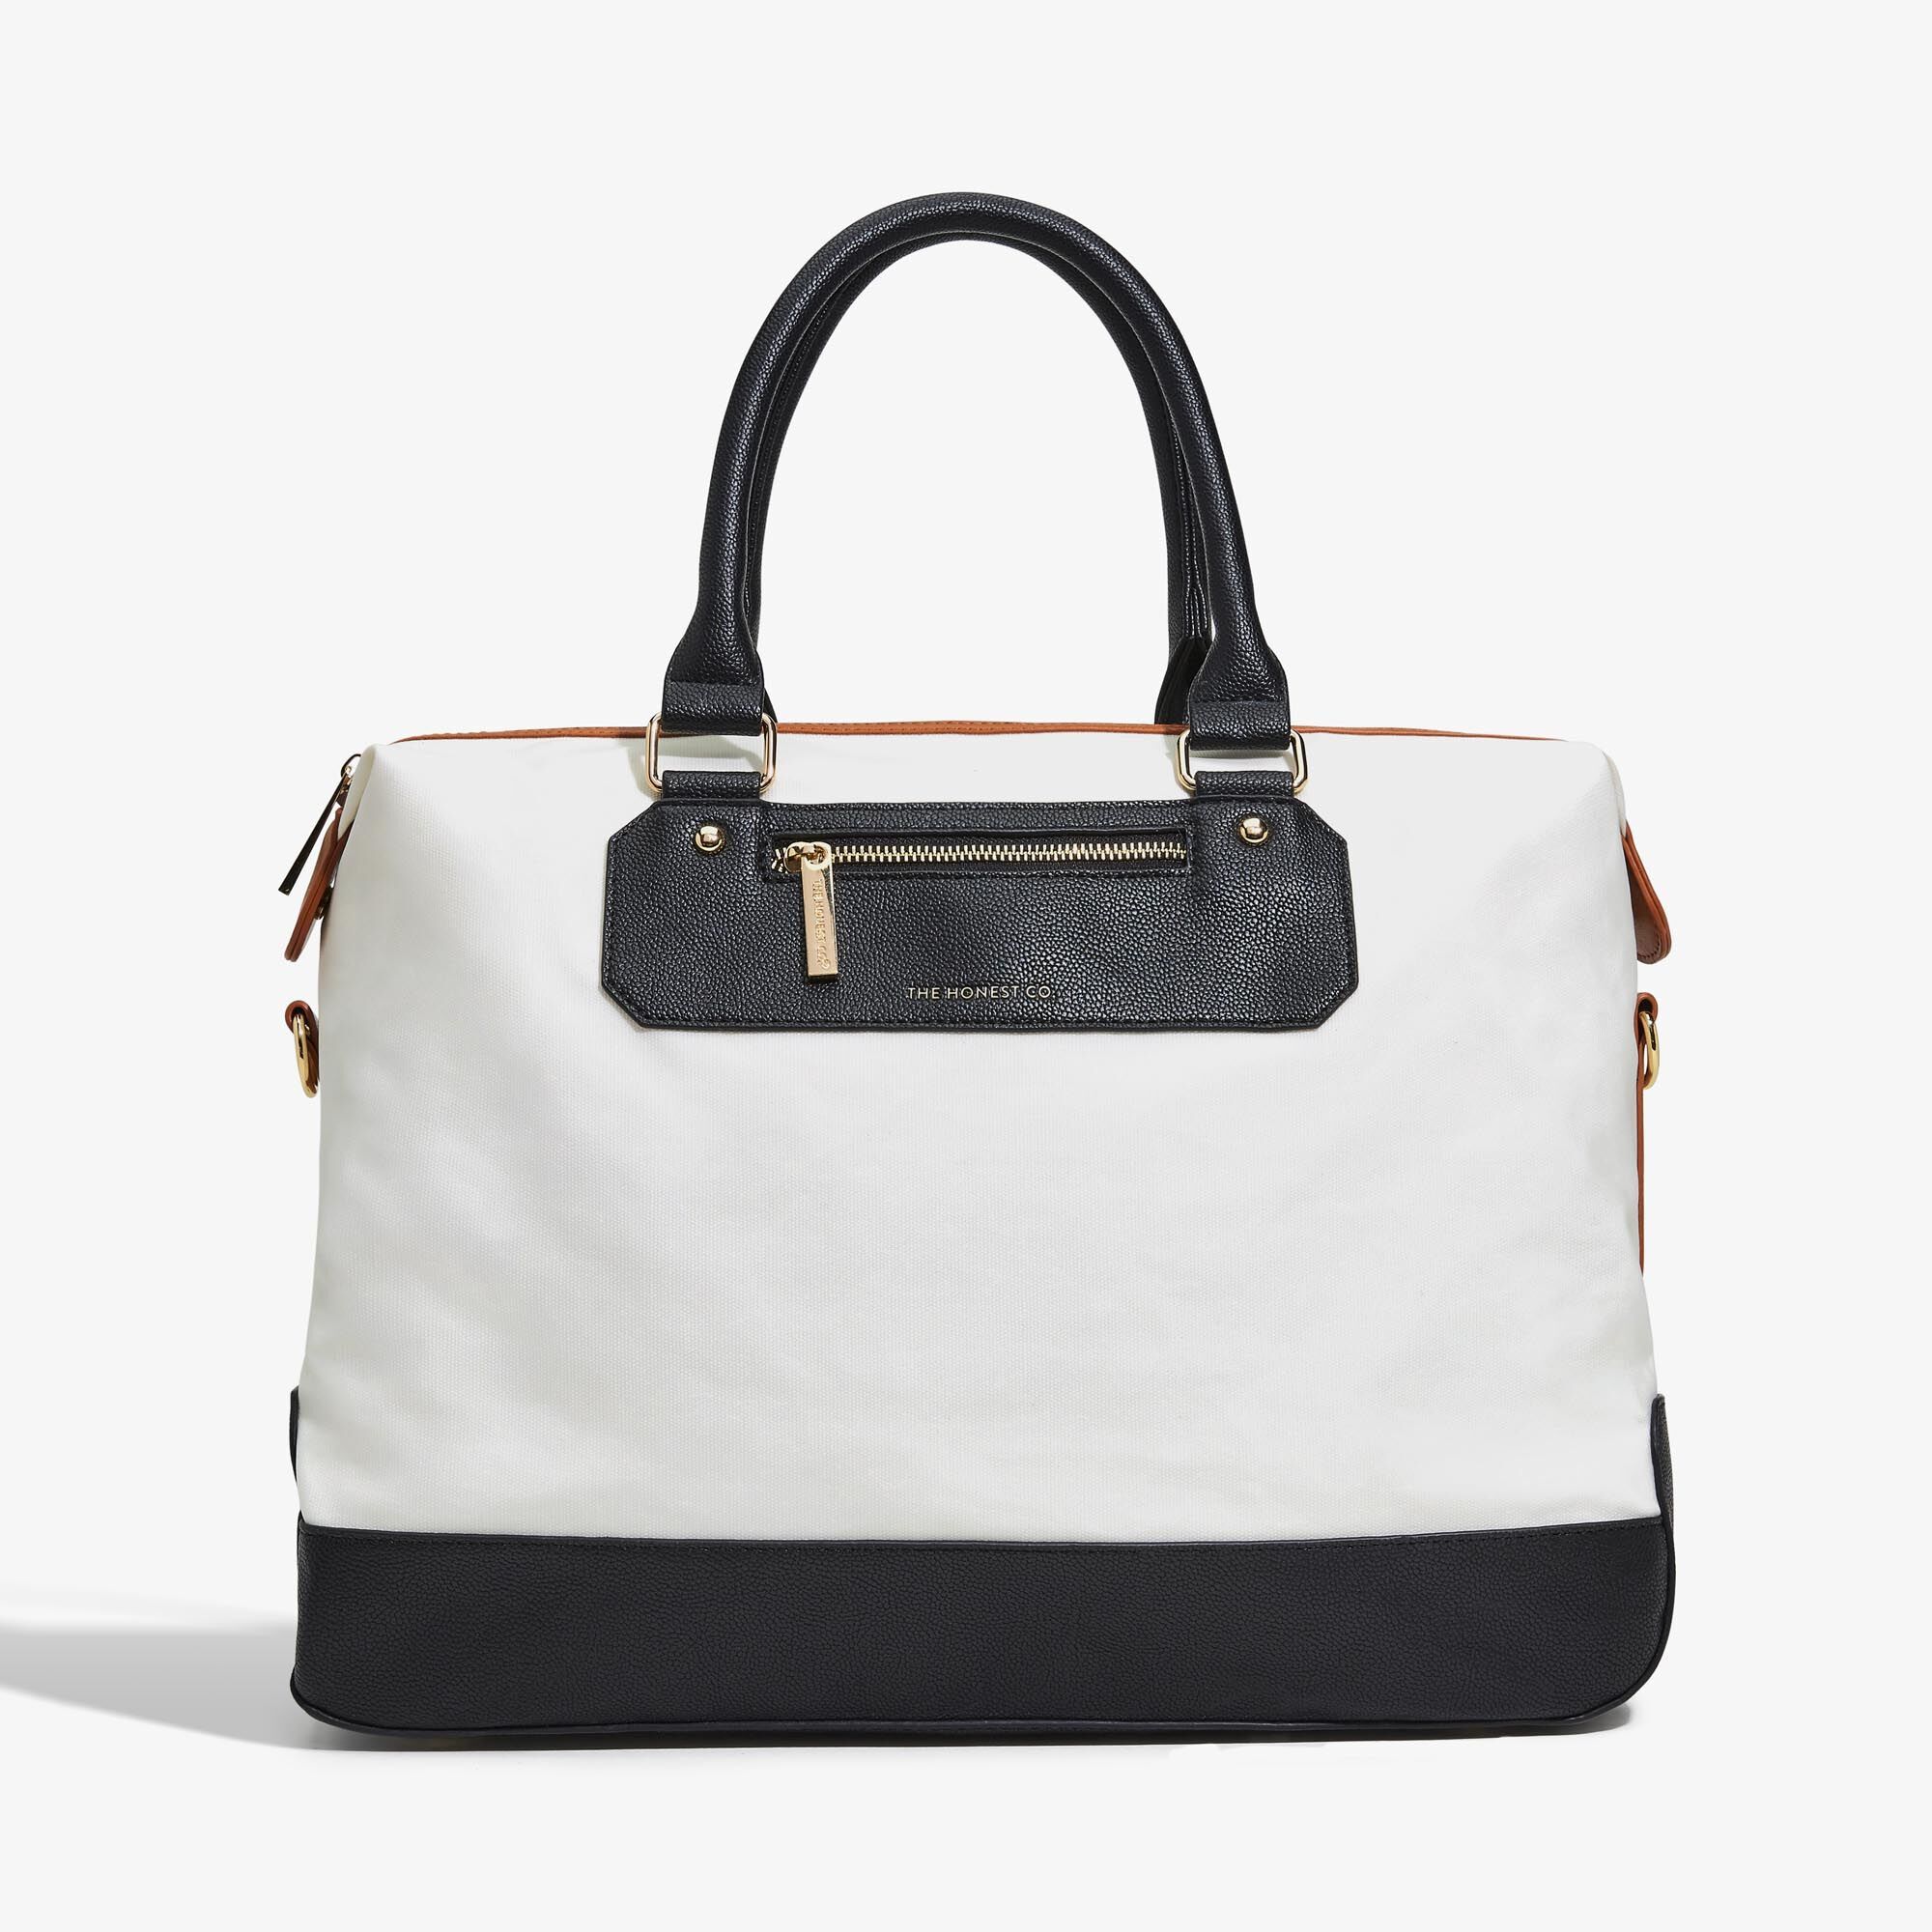 Crosstown Carryall Travel Tote | The Honest Company